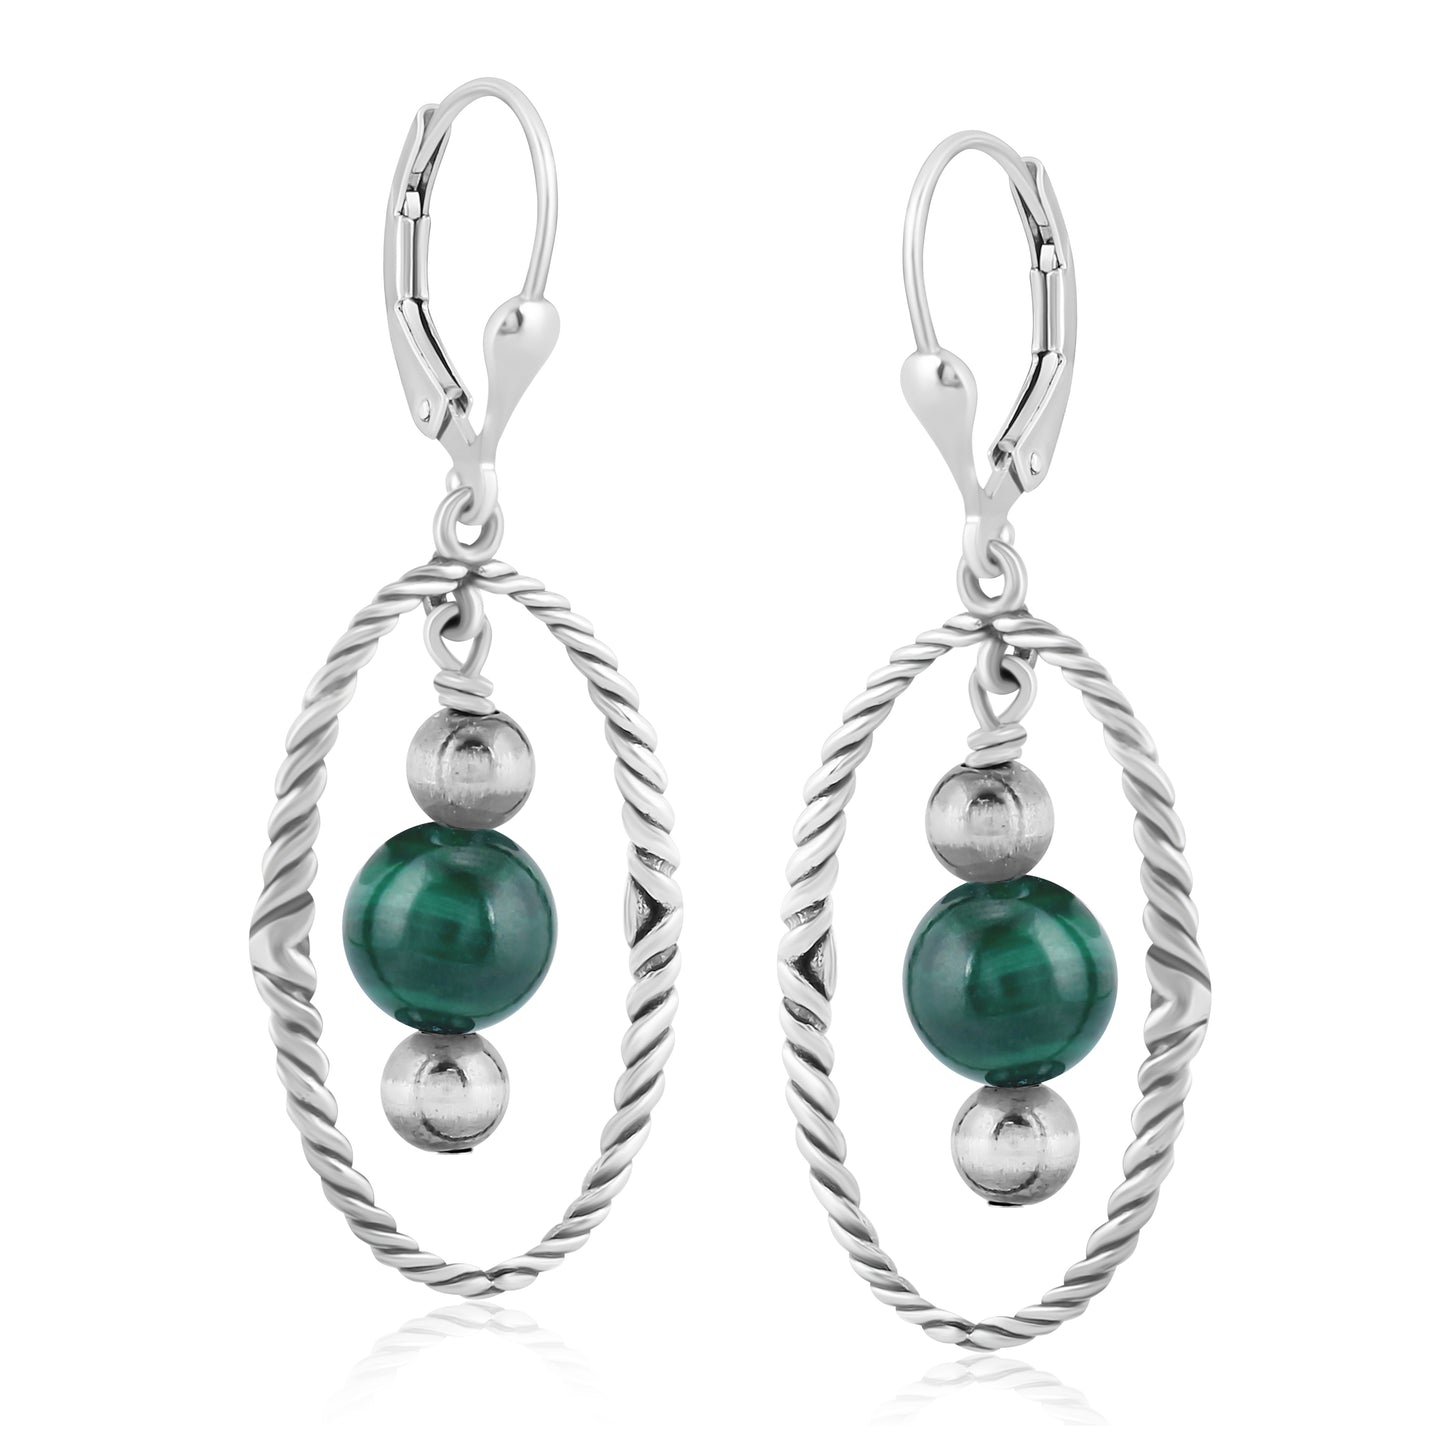 Southwestern Sterling Silver Rope and Malachite Bead Drop Earrings